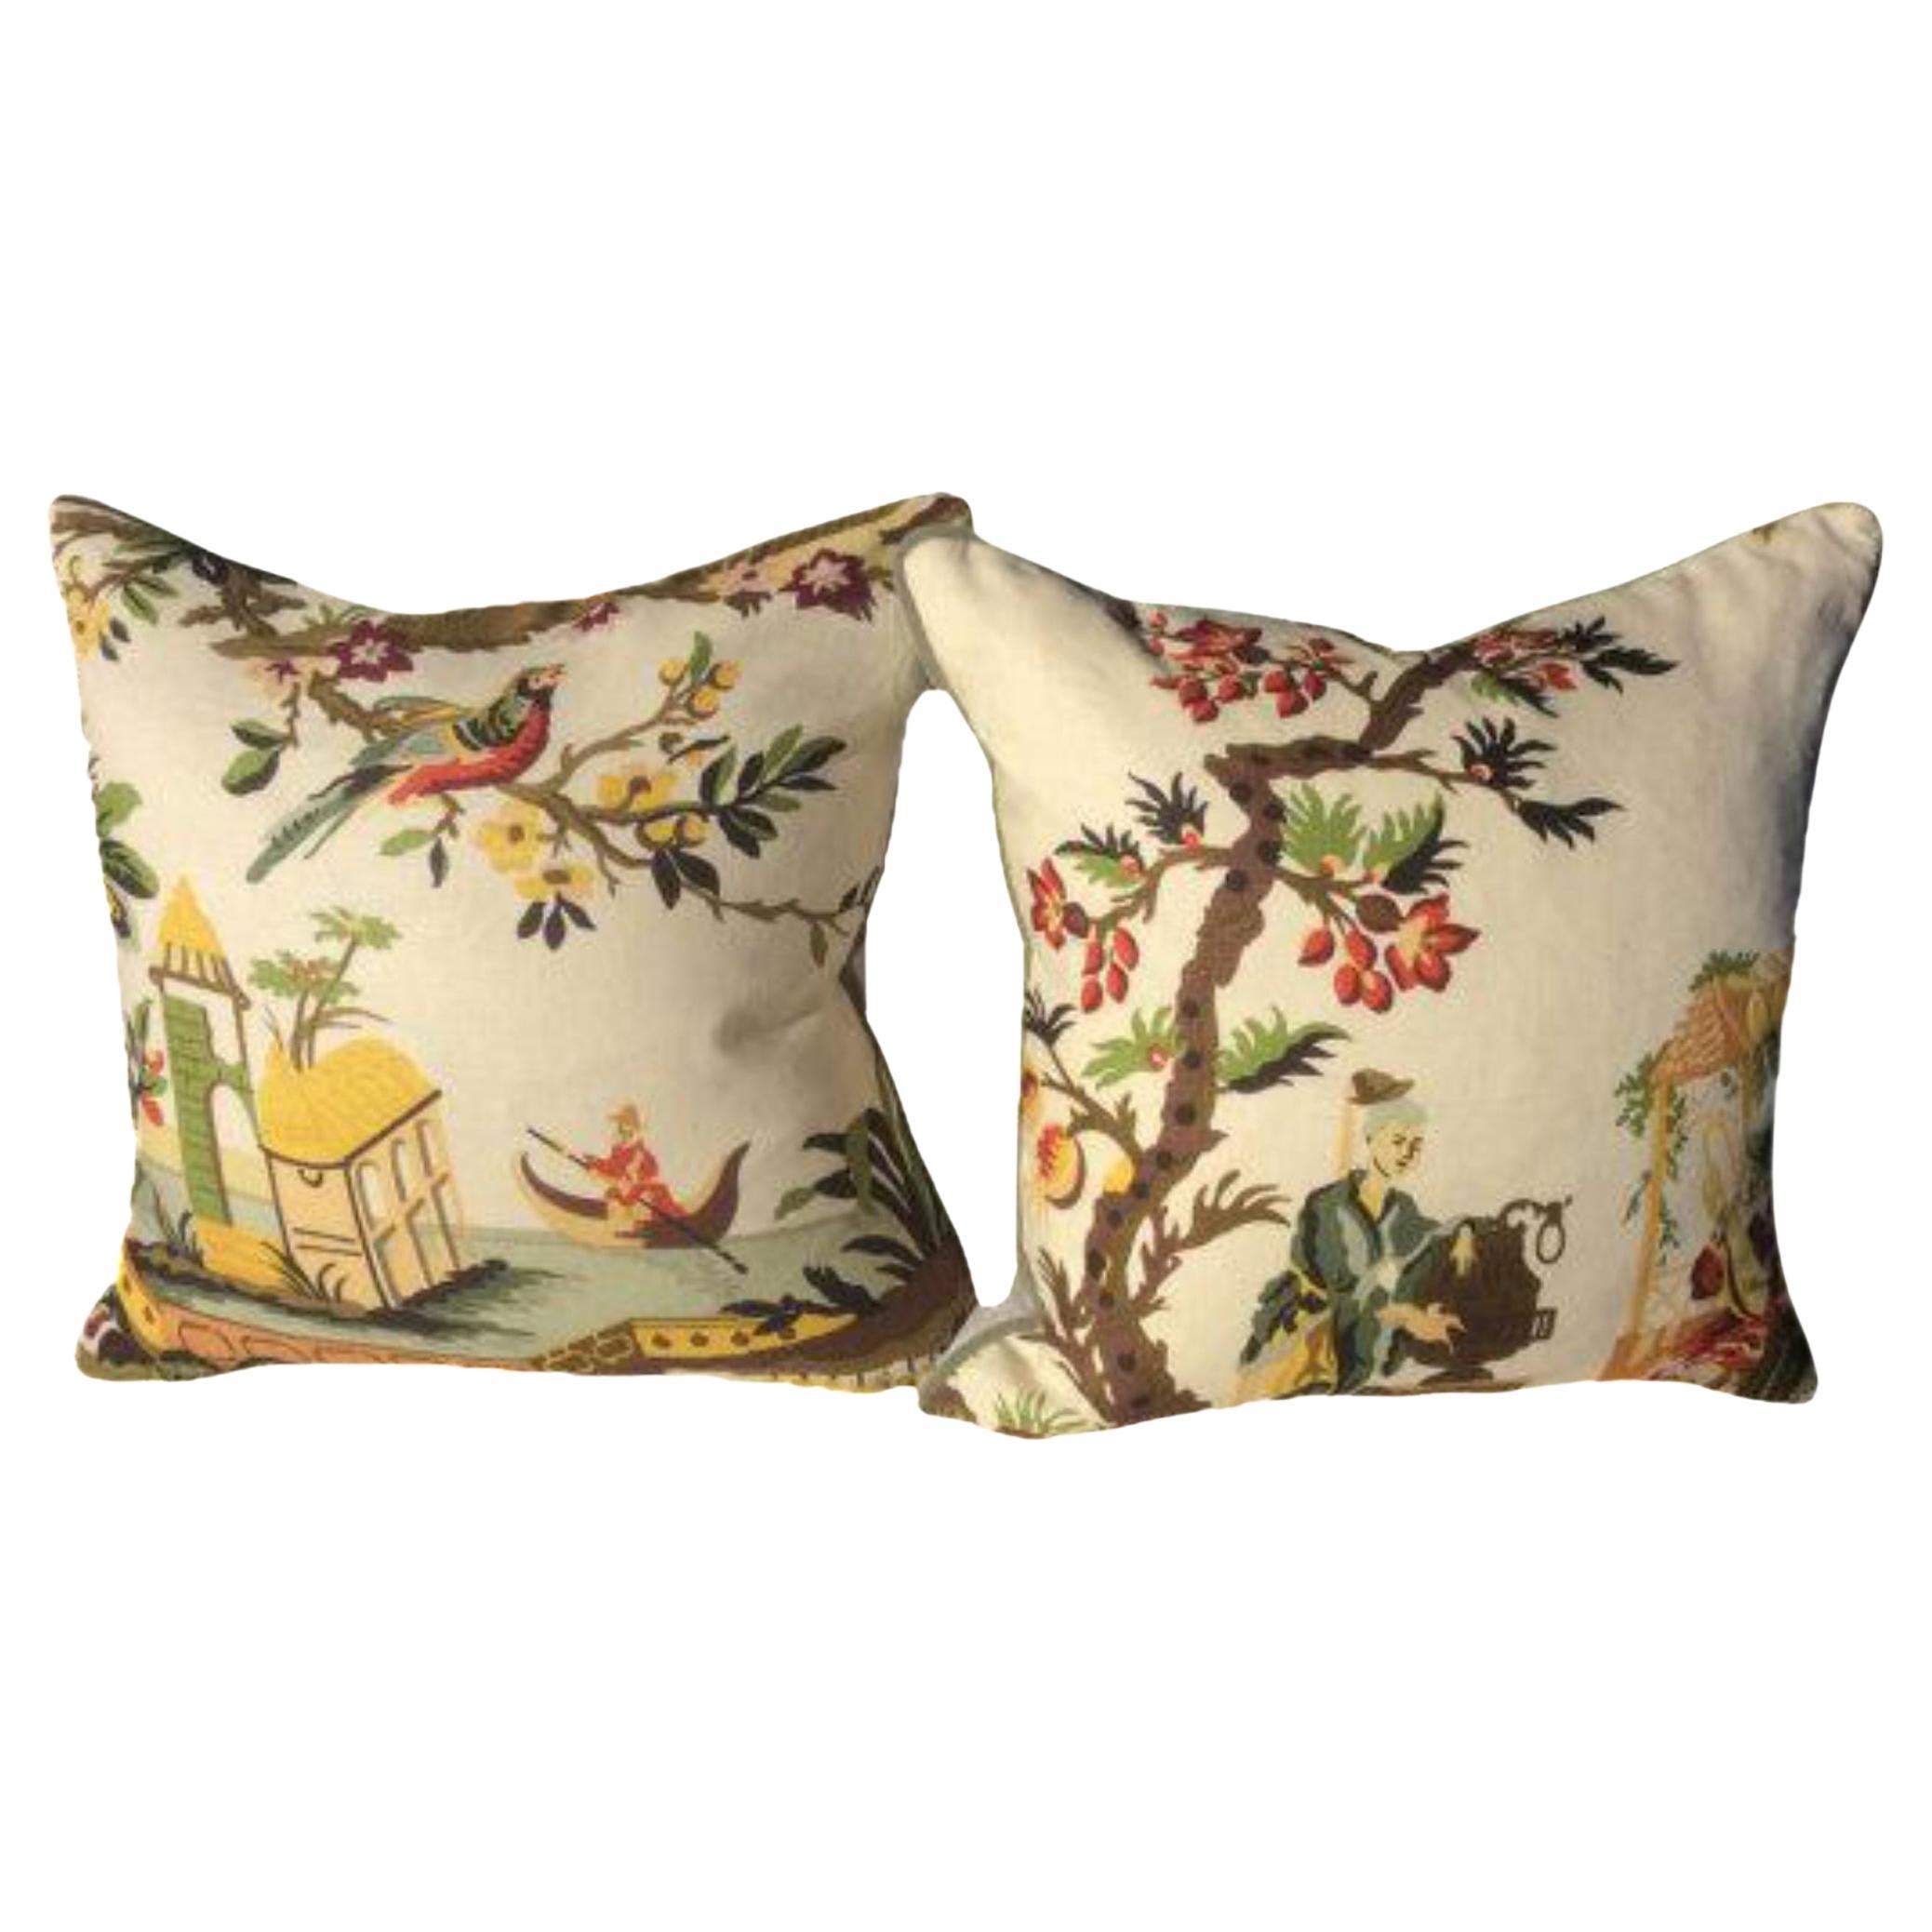 Brunschwig & Fils Le Lac in Cream Pillows - a Pair For Sale